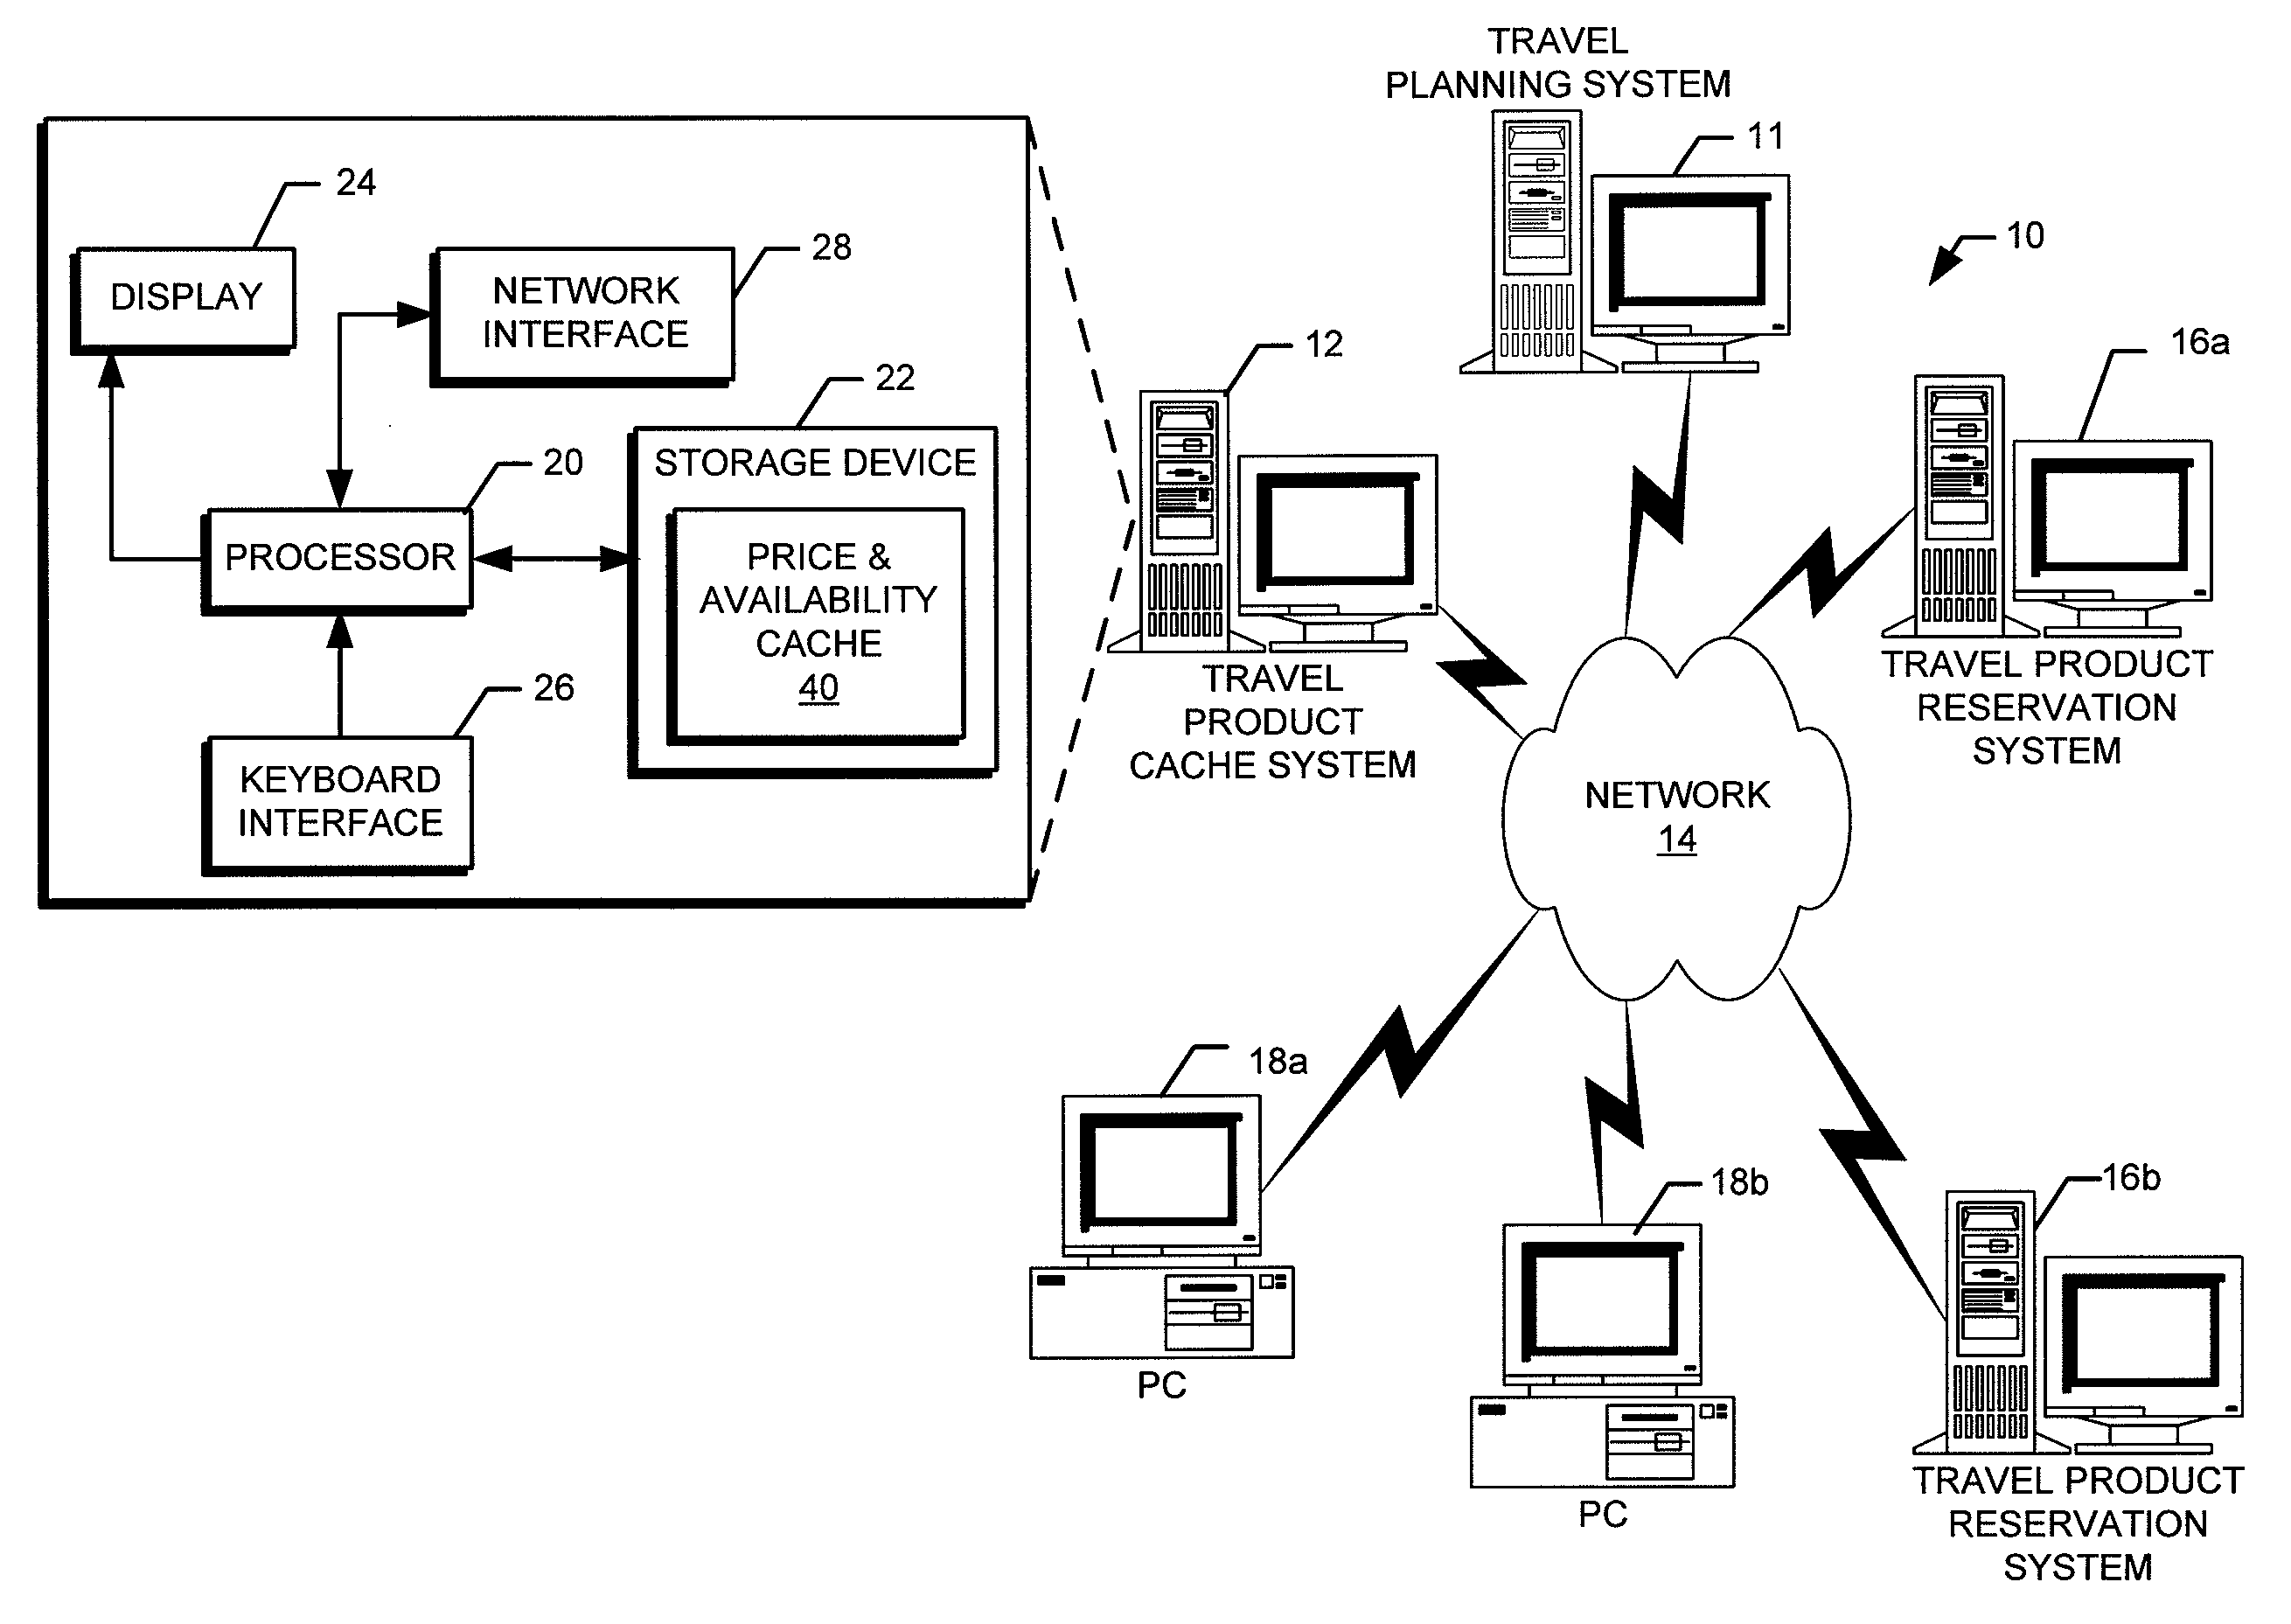 Systems, methods, and computer program products for generating and updating a cache of price and availability information for travel packages and components